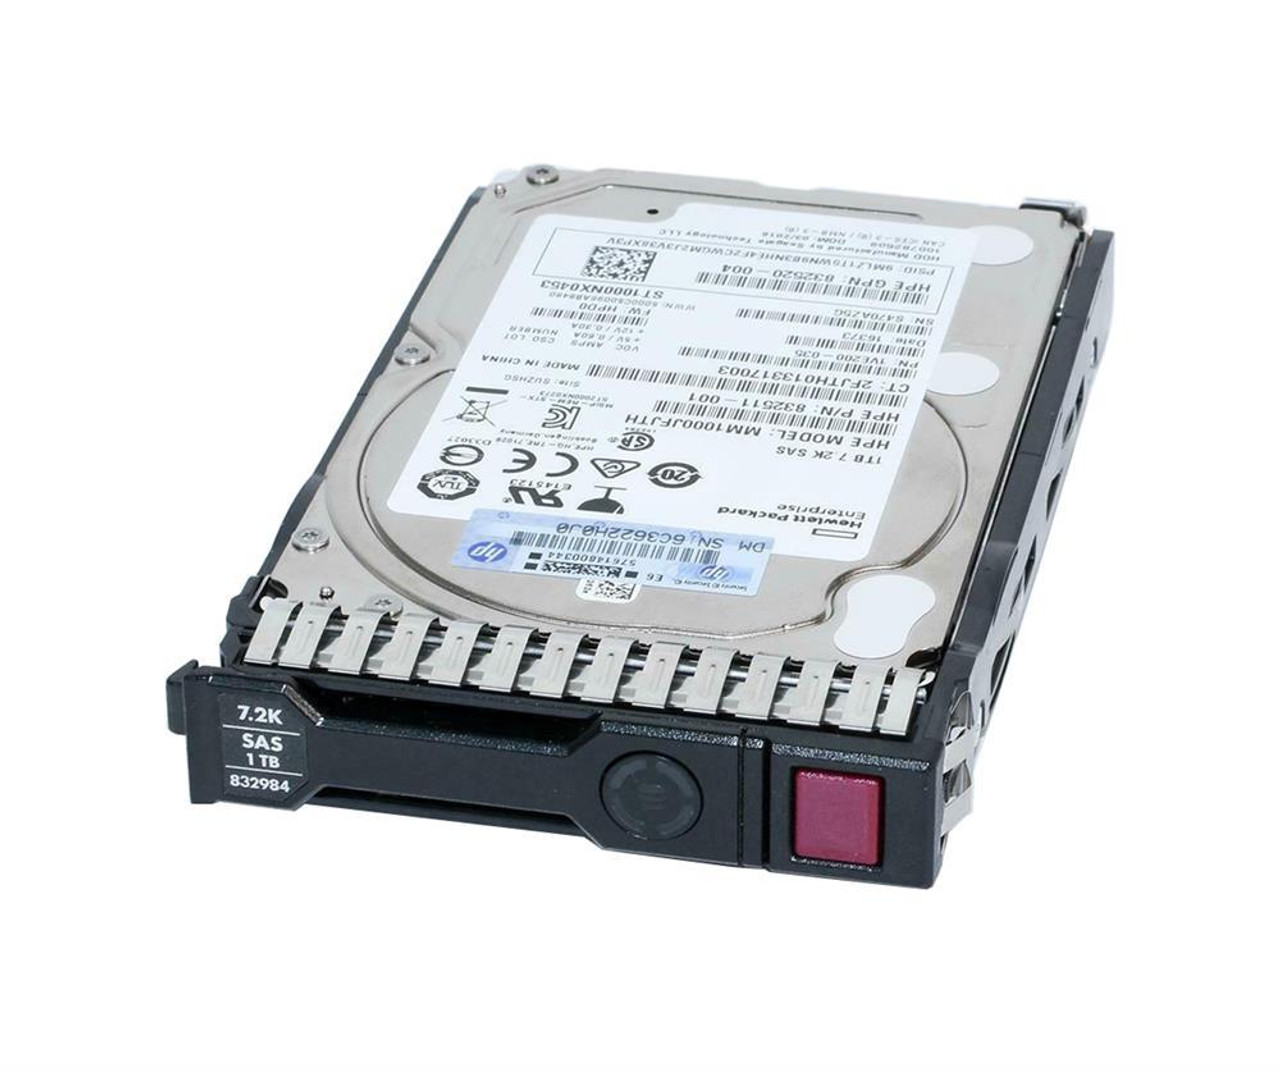 832984-001N HPE 1TB 7200RPM SAS 12Gbps Midline 2.5-inch Internal Hard Drive with Smart Carrier